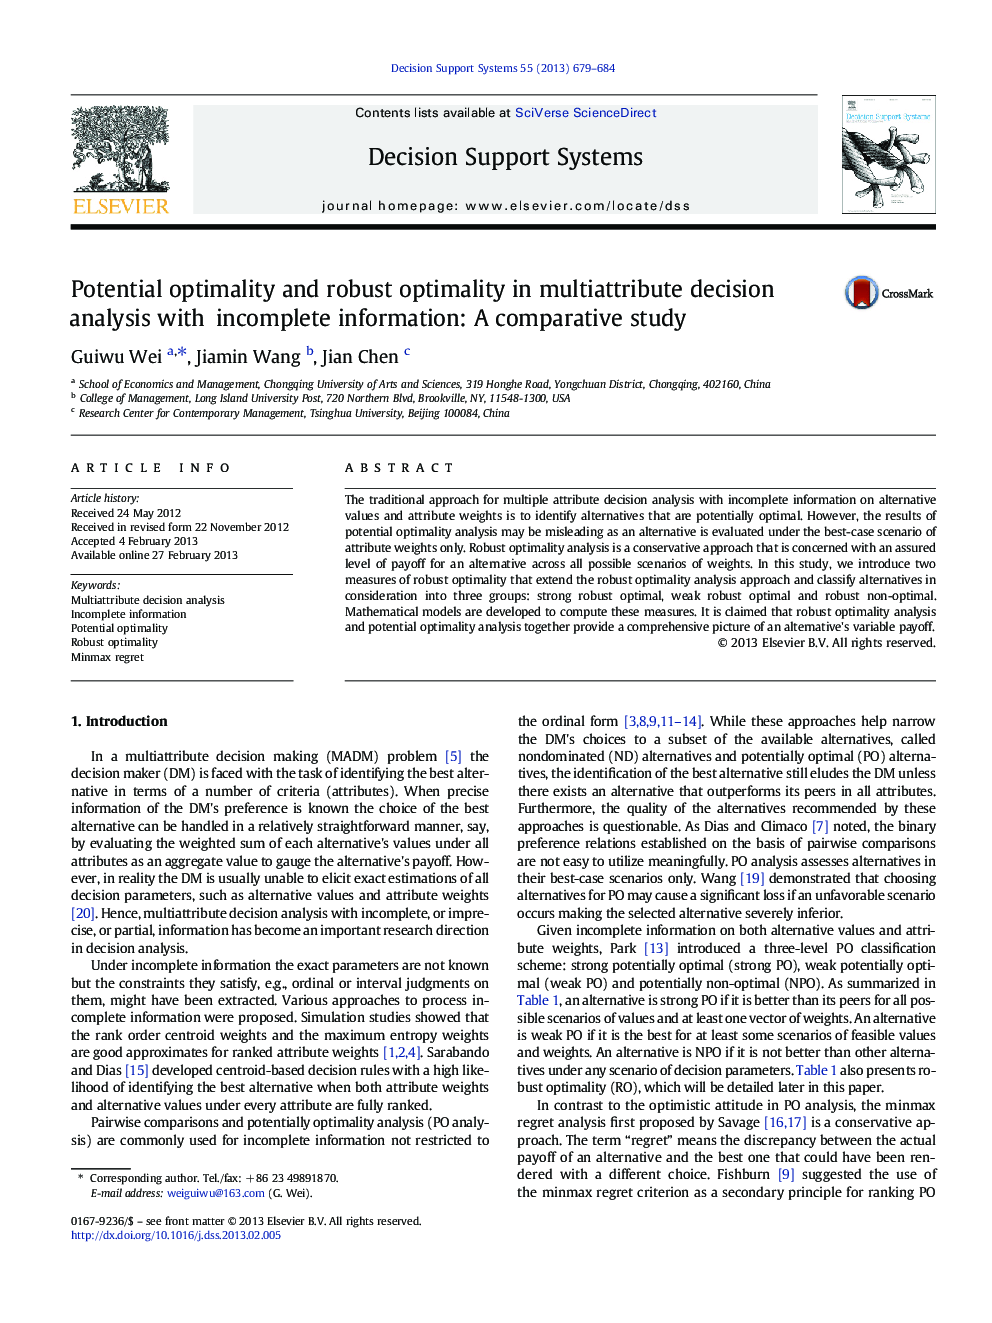 Potential optimality and robust optimality in multiattribute decision analysis with incomplete information: A comparative study